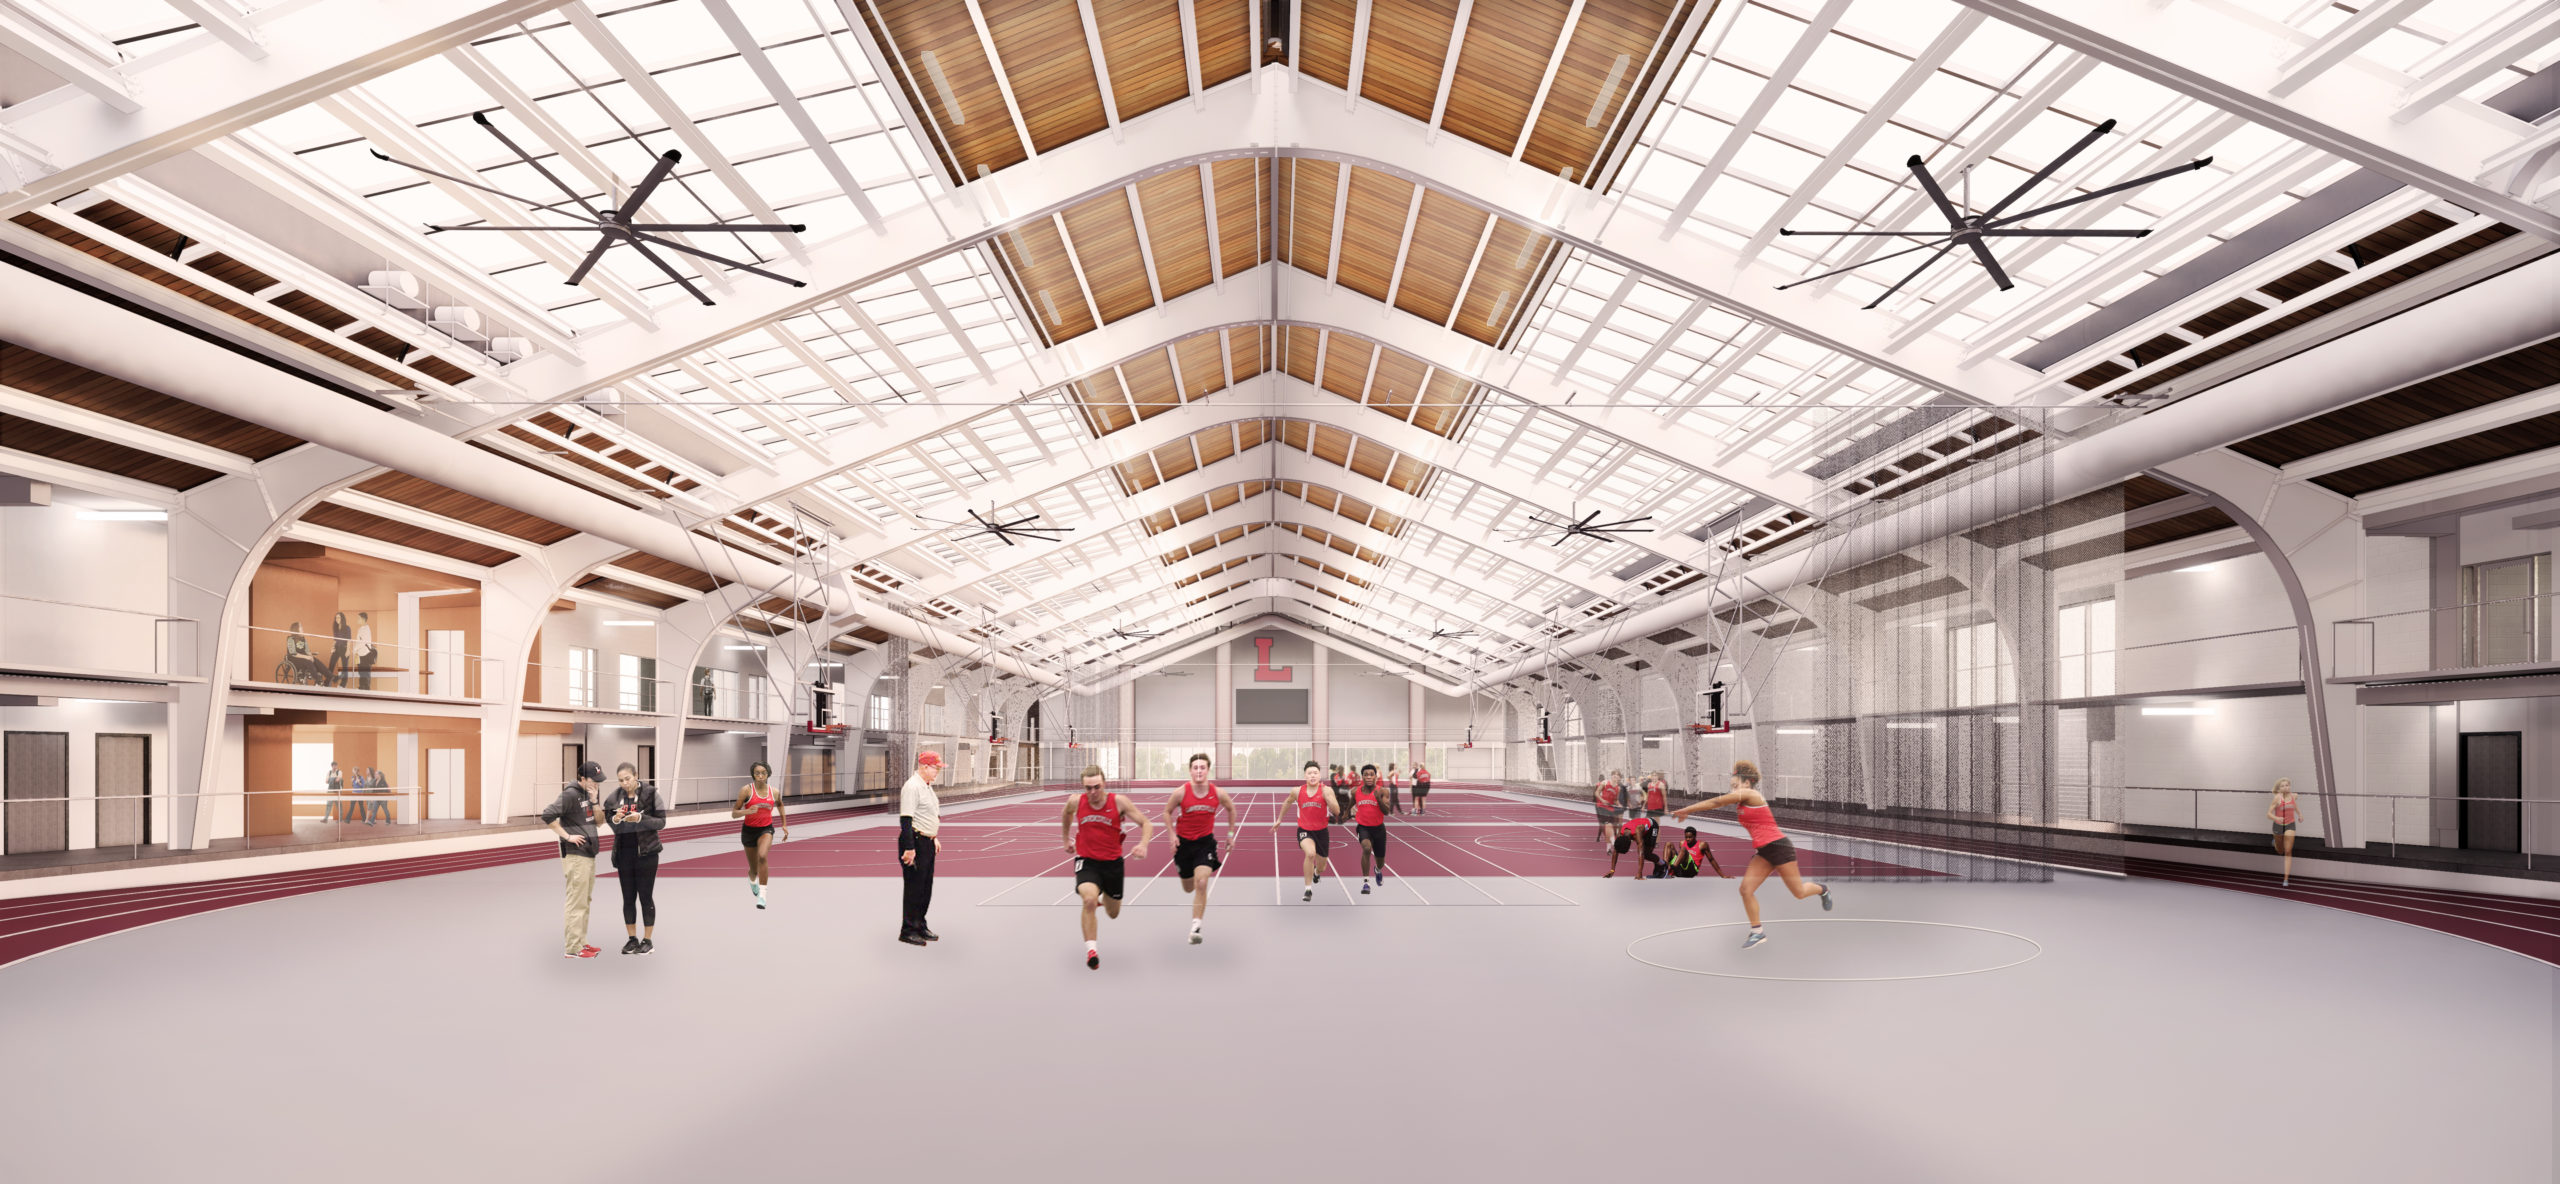 perspective rendering of interior field house